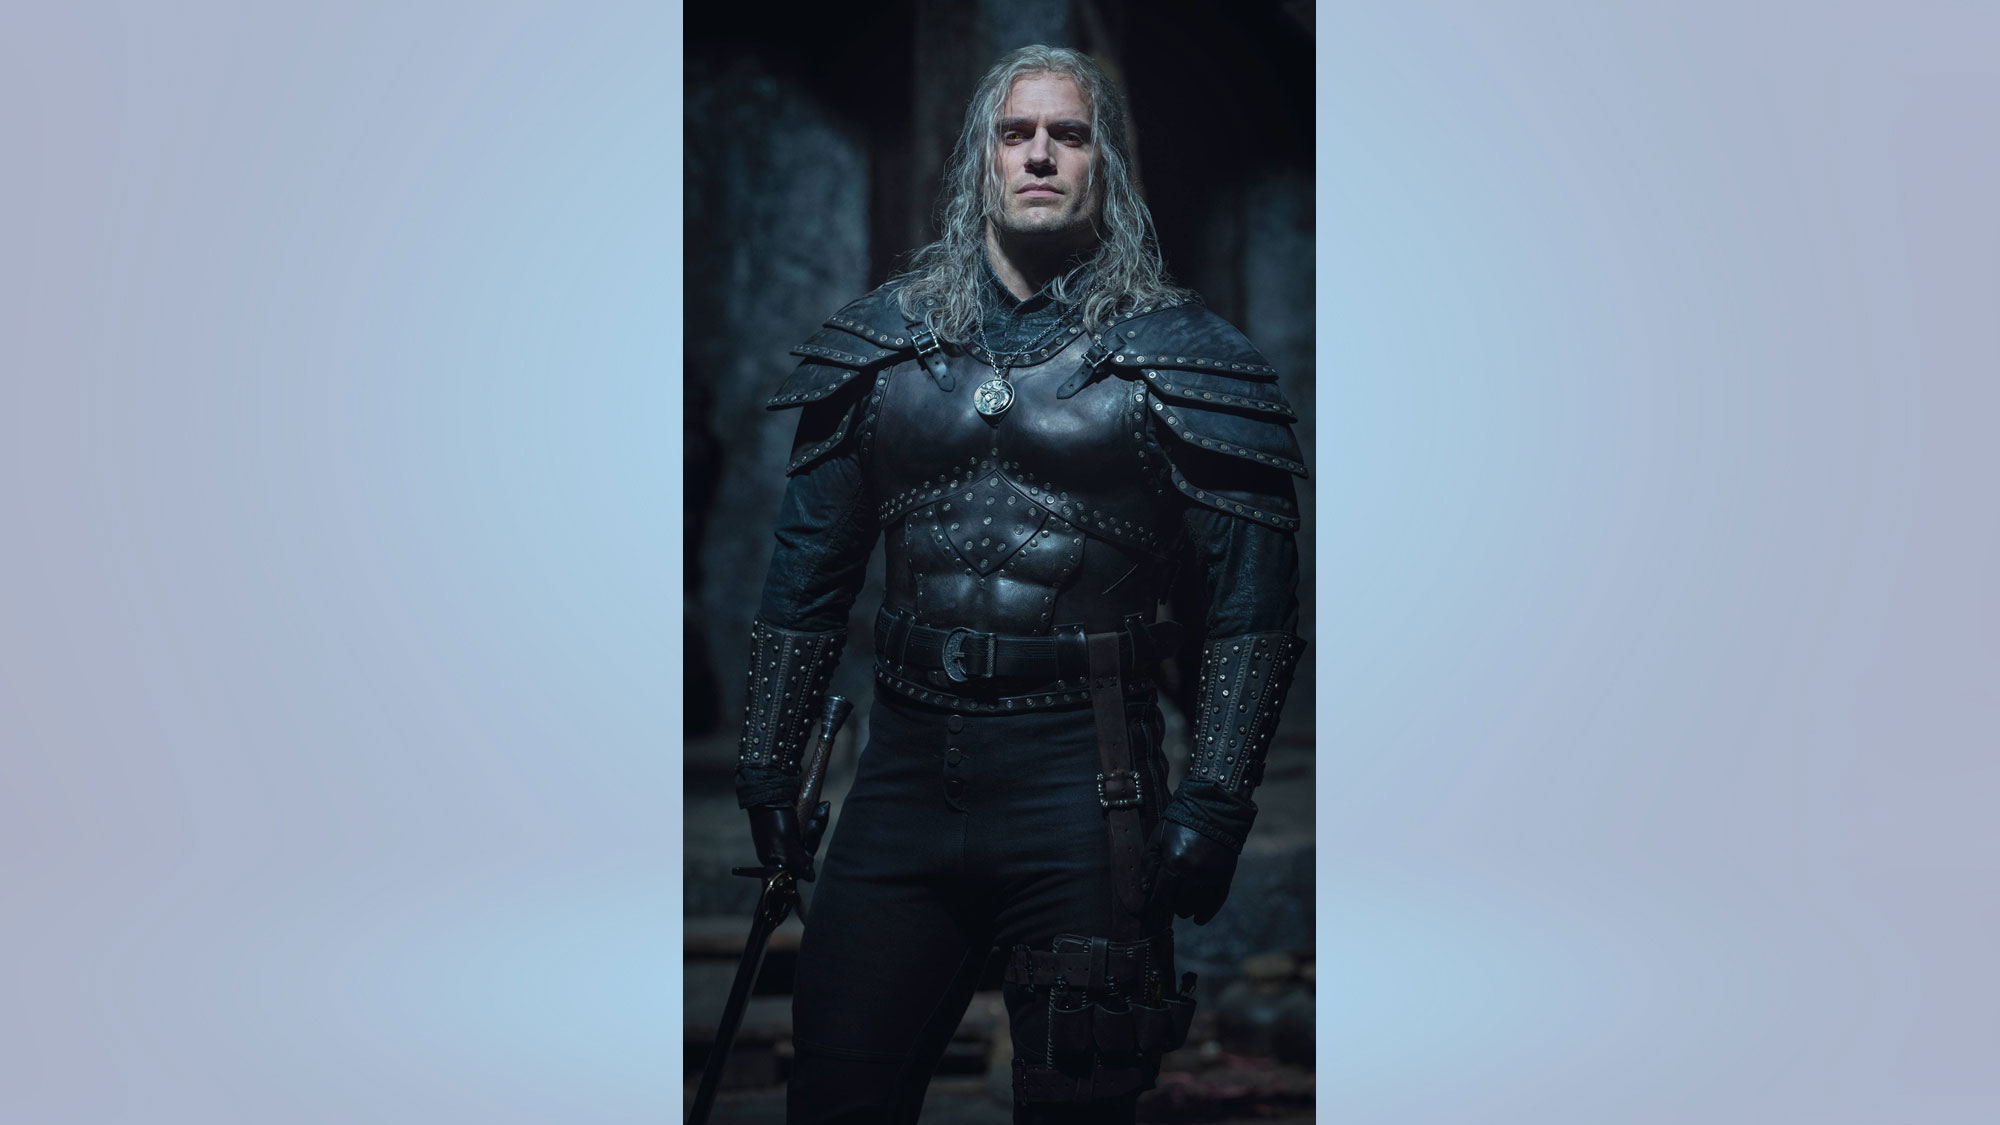 Geralt in new armor in a preview image of The Witcher Season 2